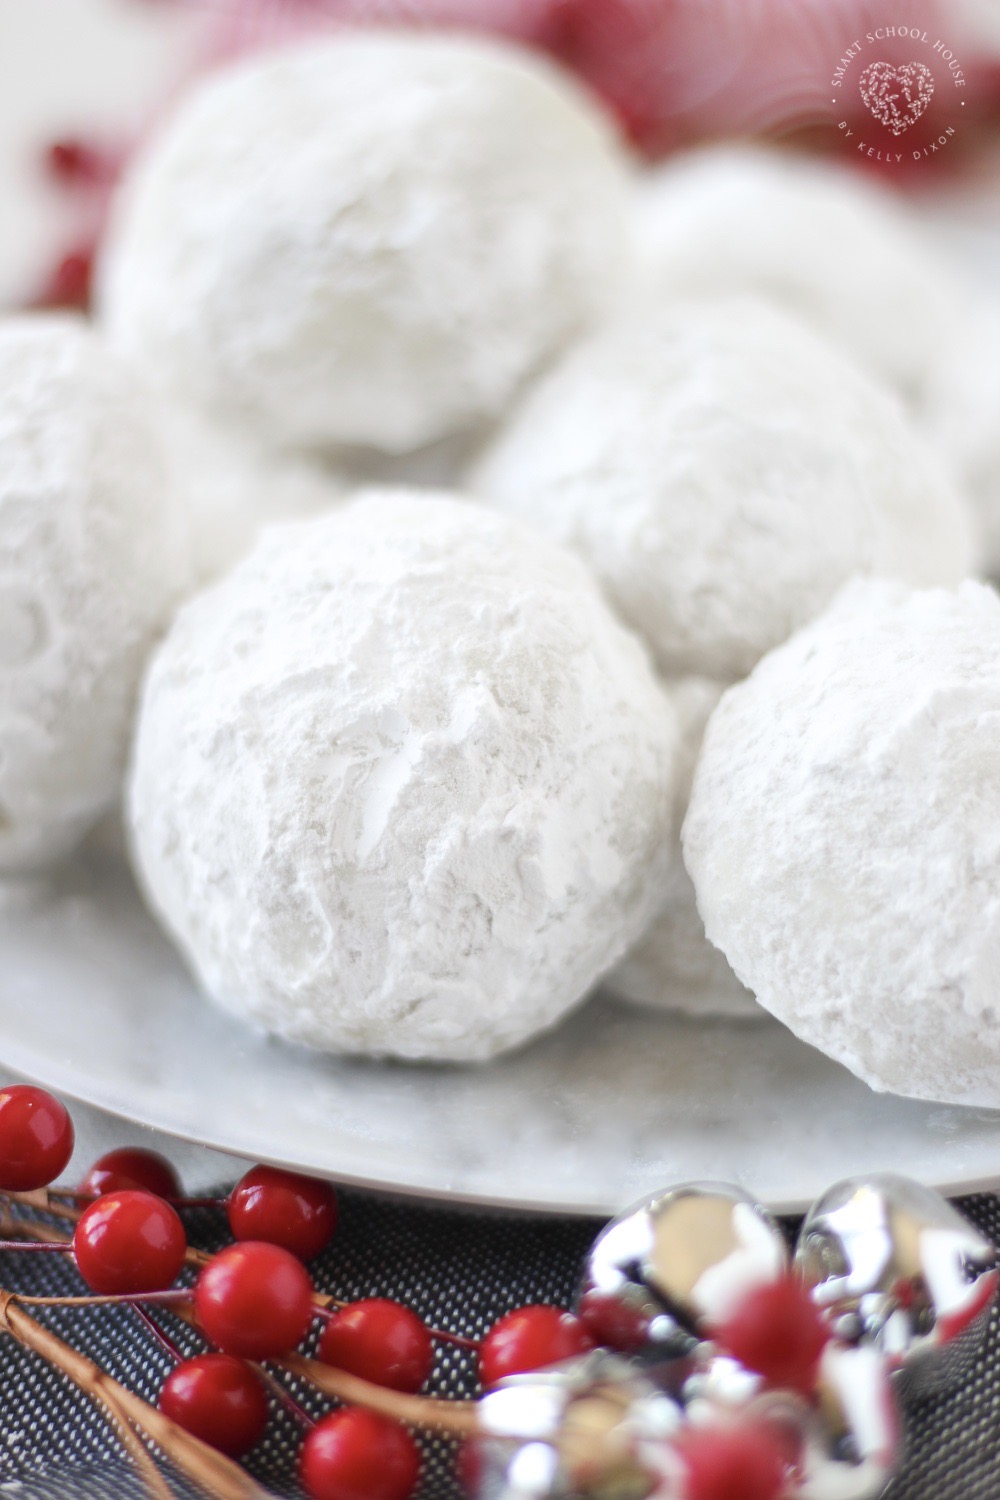 Our Snowball Cookies are a Christmas favorite! They have a buttery vanilla flavor surrounded by soft and snowy powdered sugar. These melt in your mouth cookies are a beautiful addition to your holiday cookie plates and dessert tables.